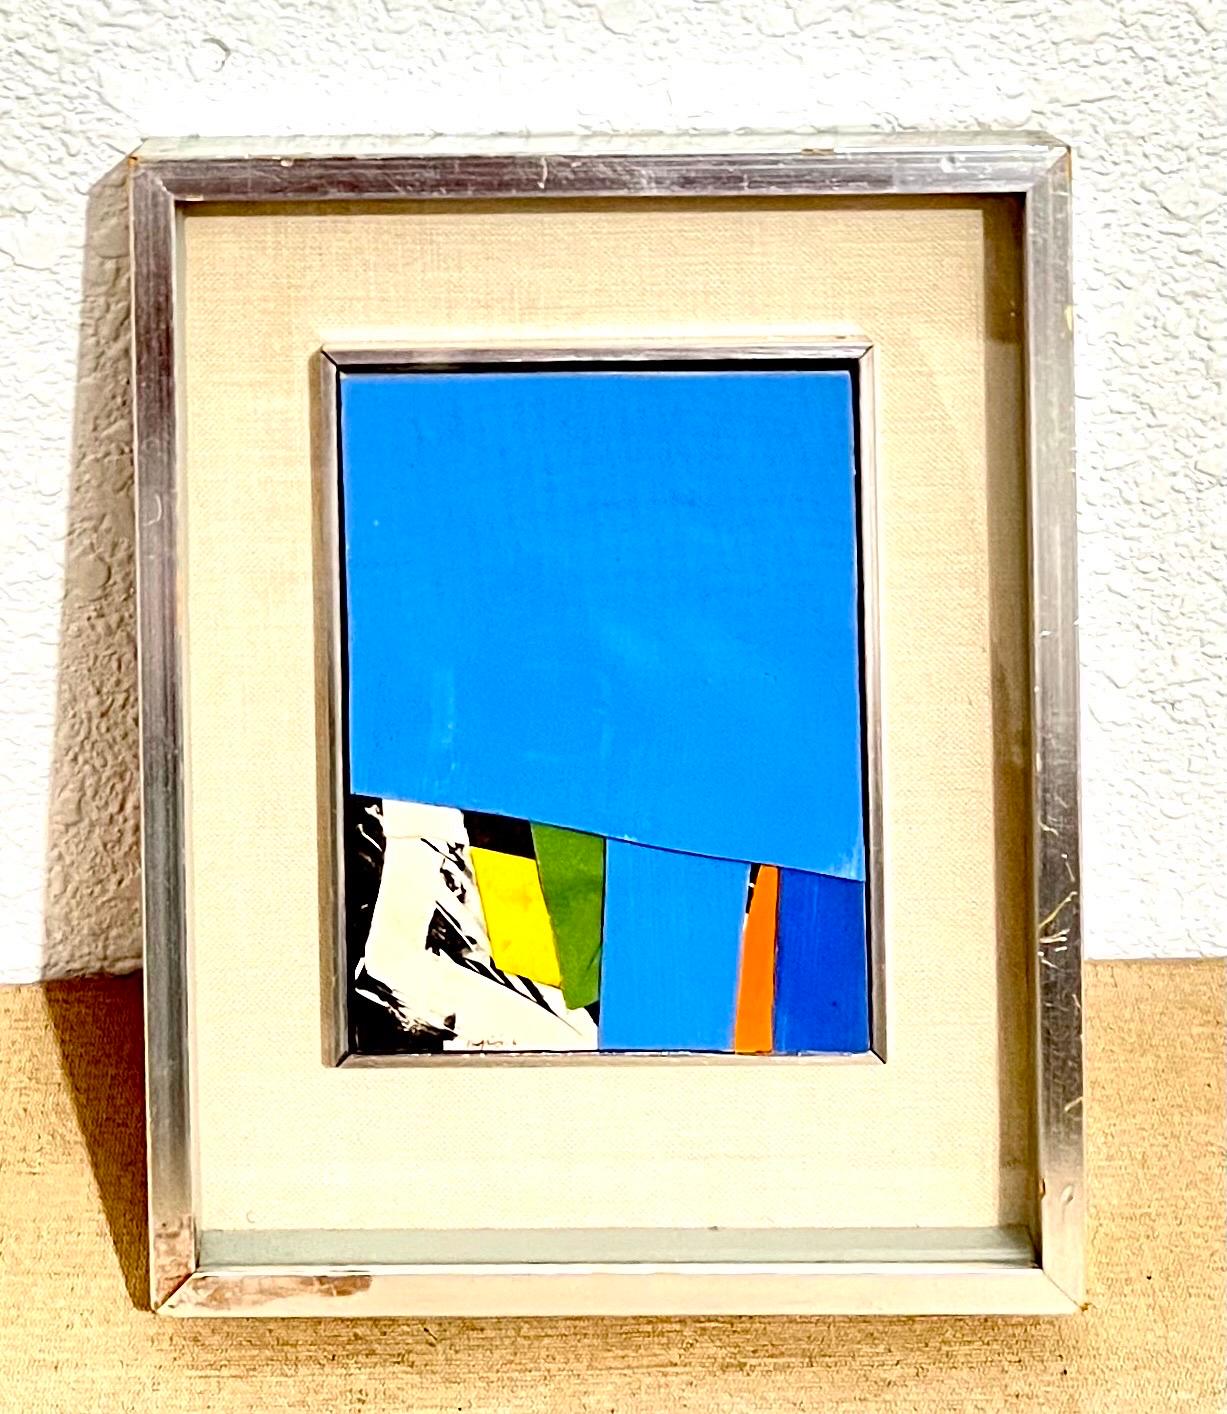 Budd Hopkins, American (1931-2011)
Untitled, Abstract Blue Composition, 1966
paper collage, hand signed and dated lower left
Blue, yellow, green, orange, black & white.
6 x 4 1/2 inches
frame dimensions: 10 1/8 x 8 1/8 x 1 3/8, metal shadow box